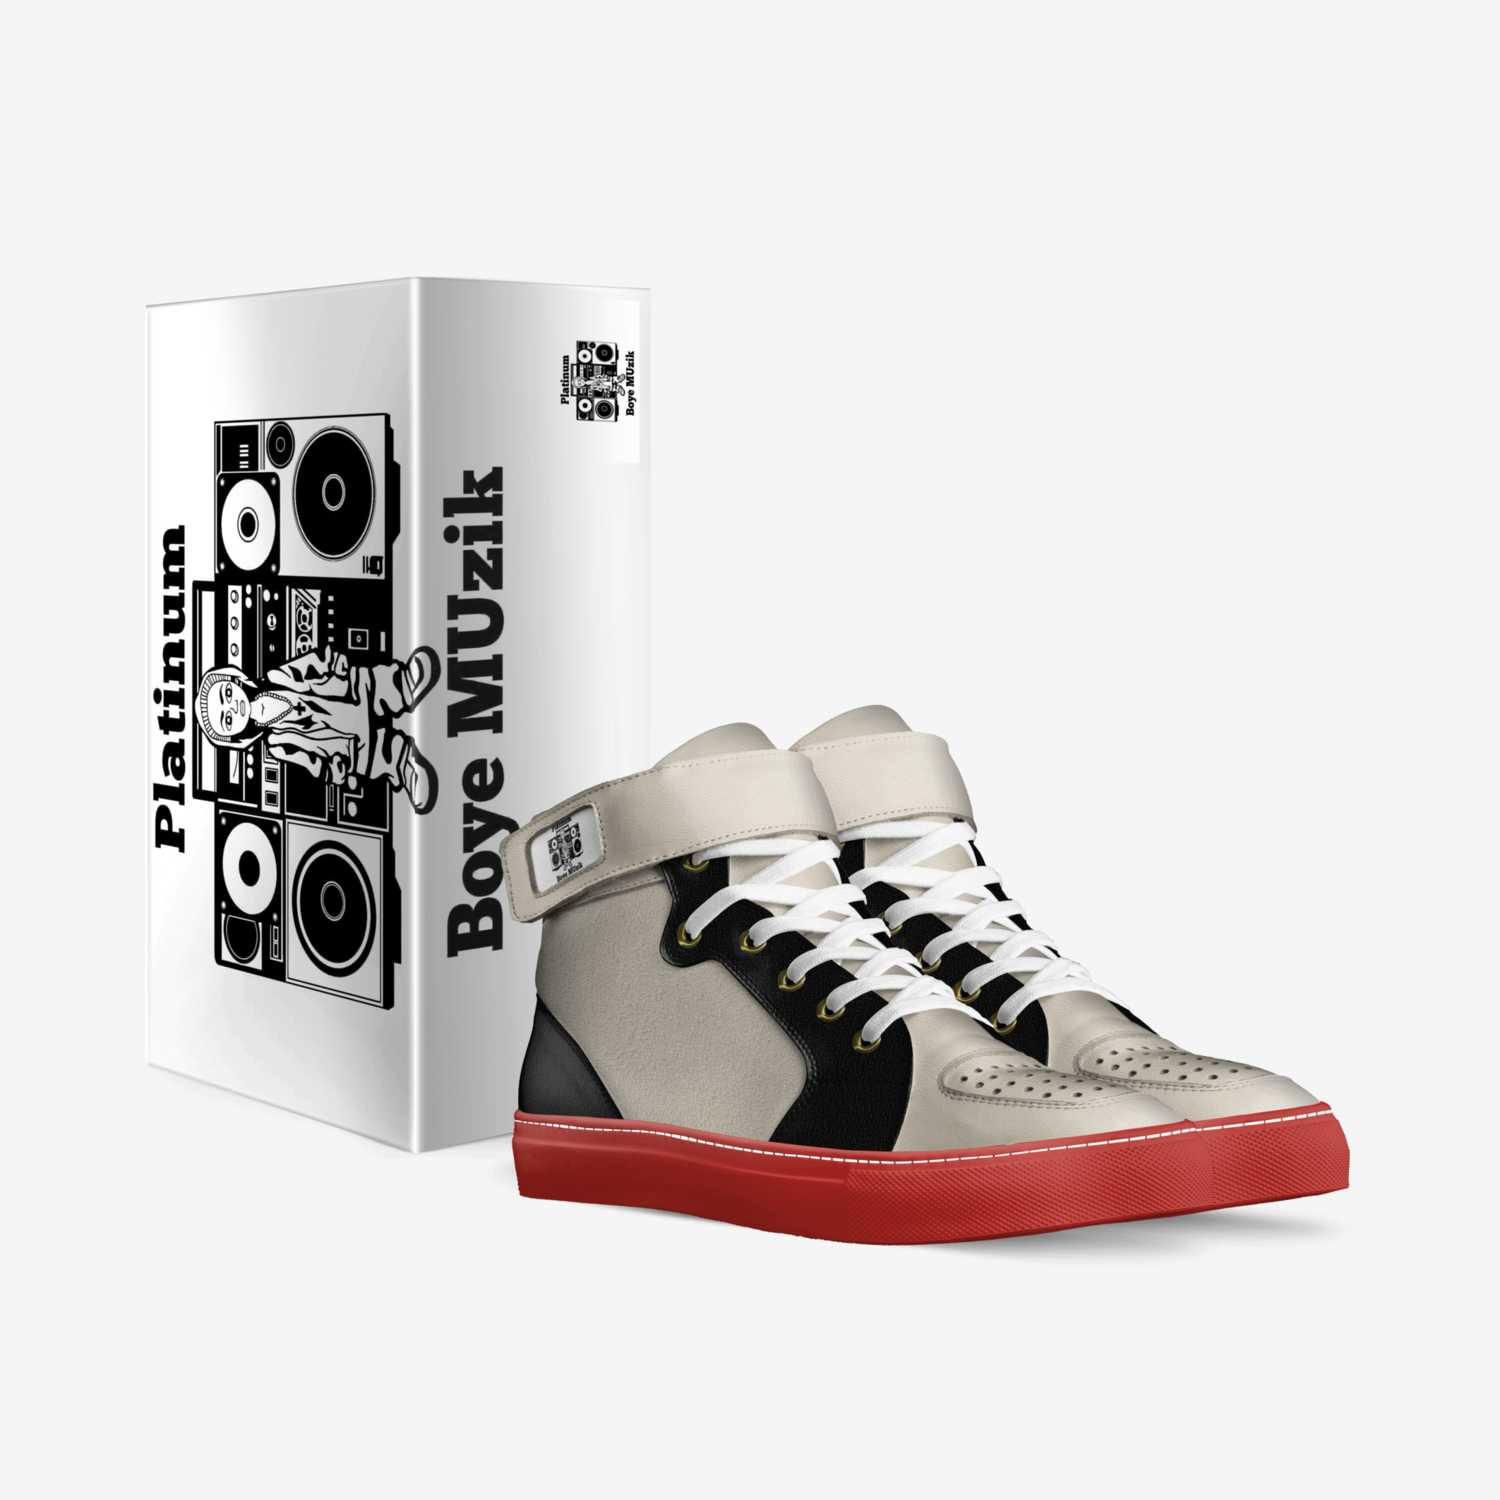 Platinum kicks custom made in Italy shoes by Mikeal D Smith | Box view